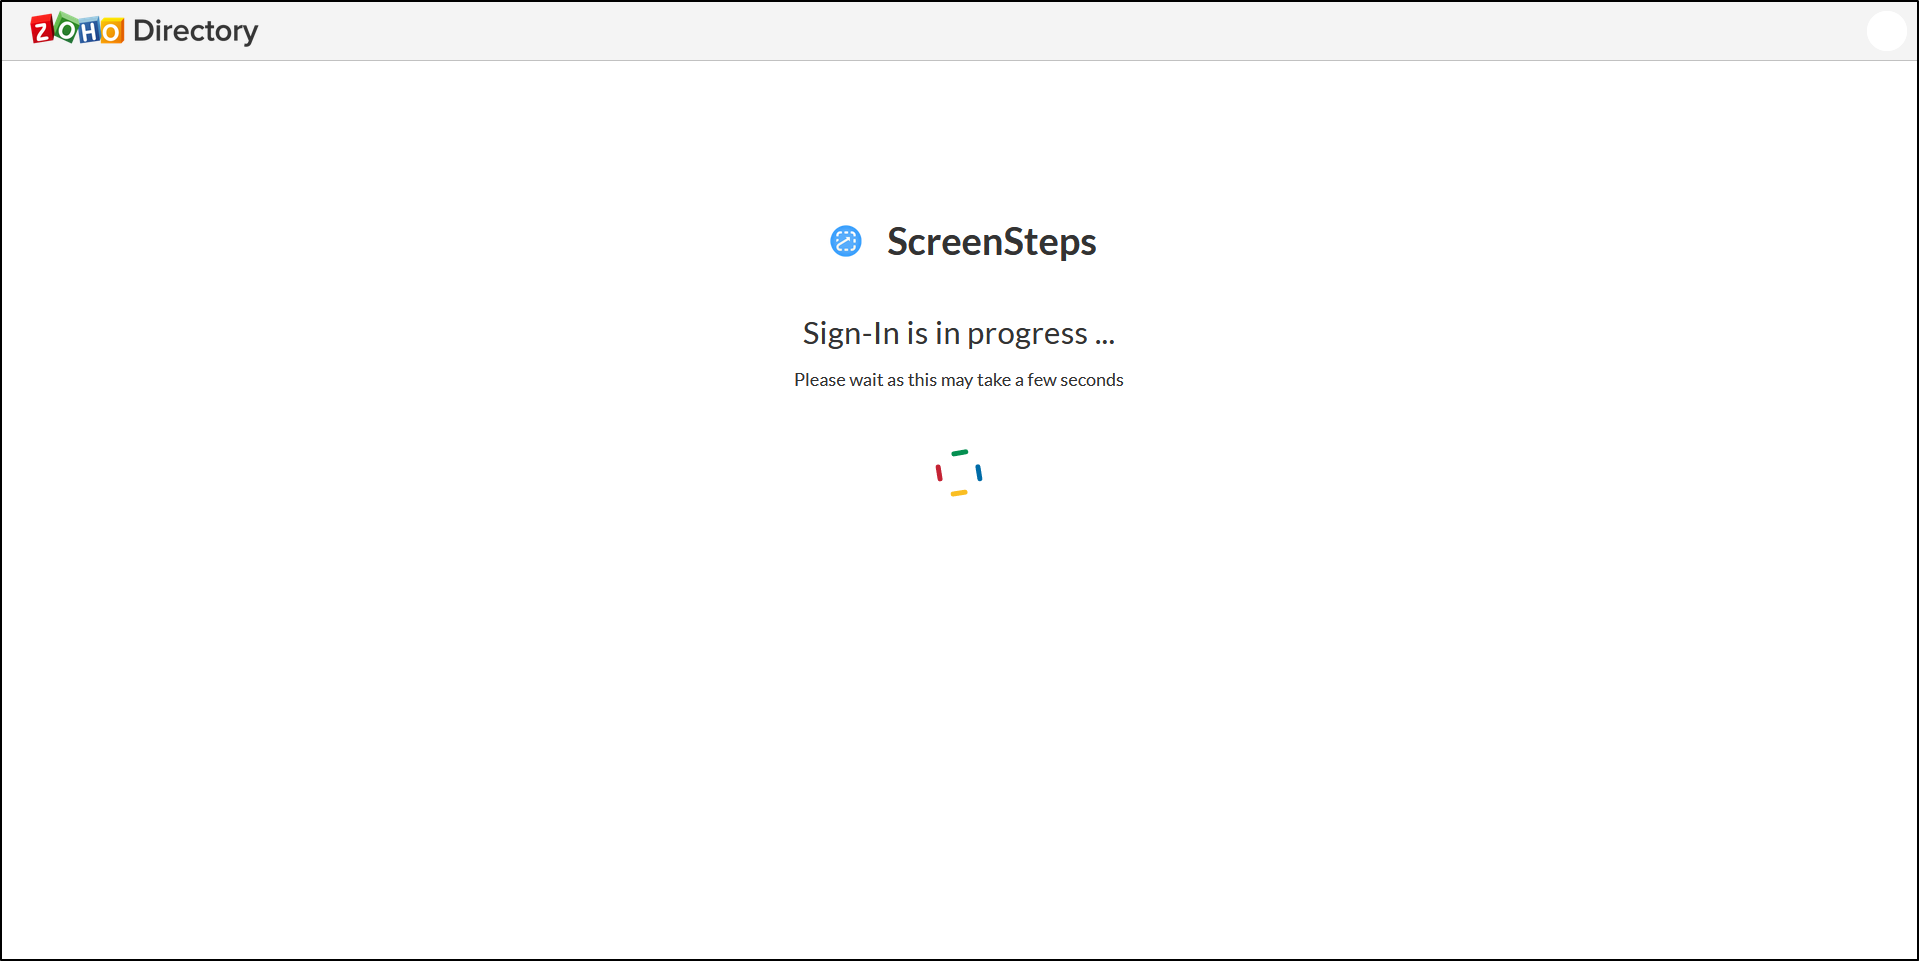 Testing SSO for ScreenSteps in Zoho One and Zoho Directory